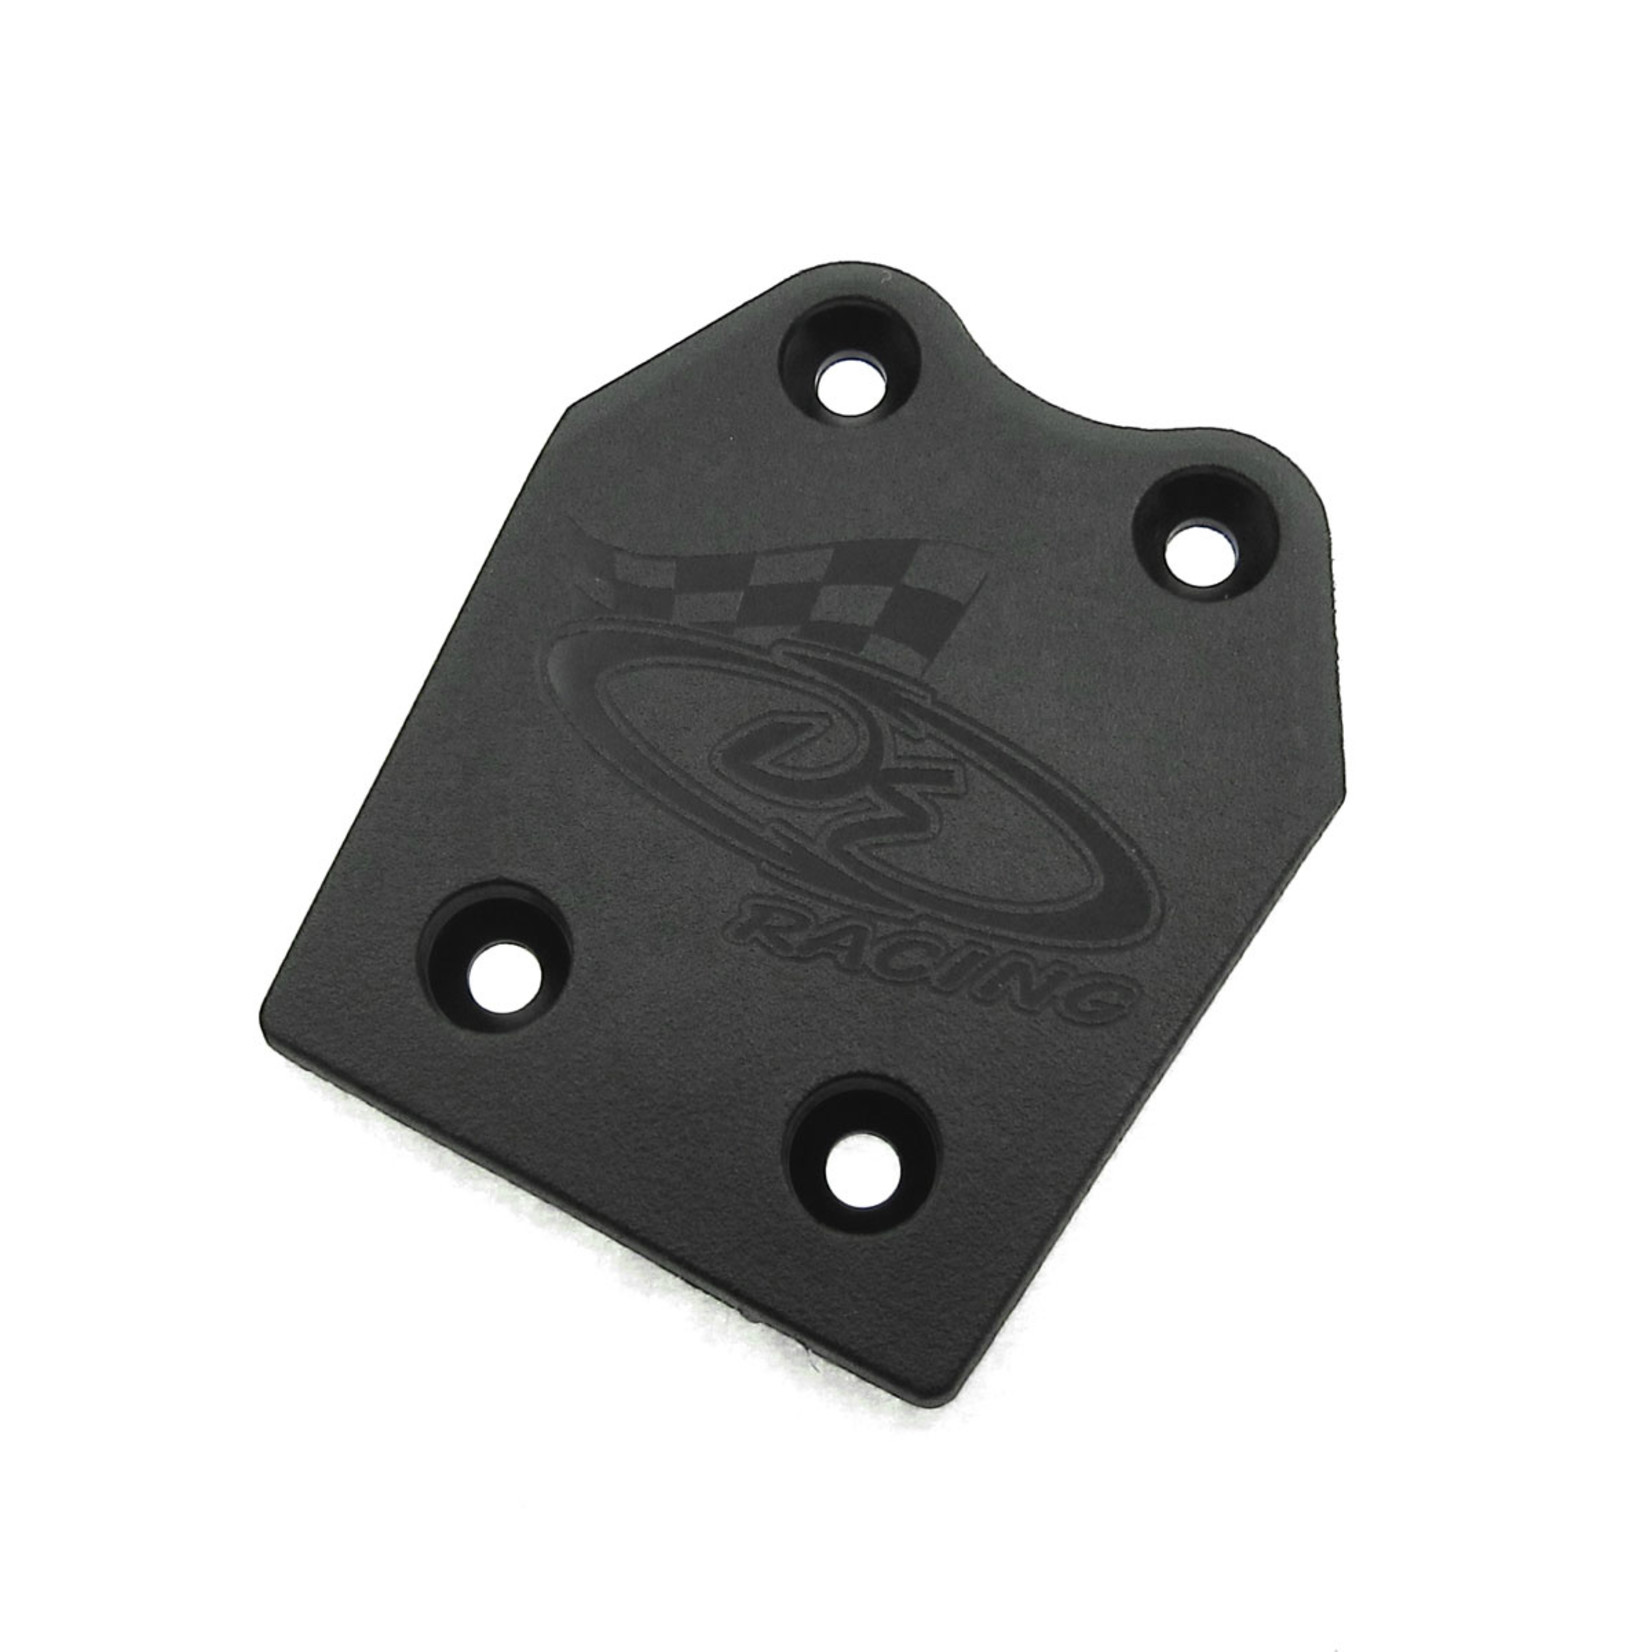 DE Racing XD Rear Skid Plates for The Mugen MBX7